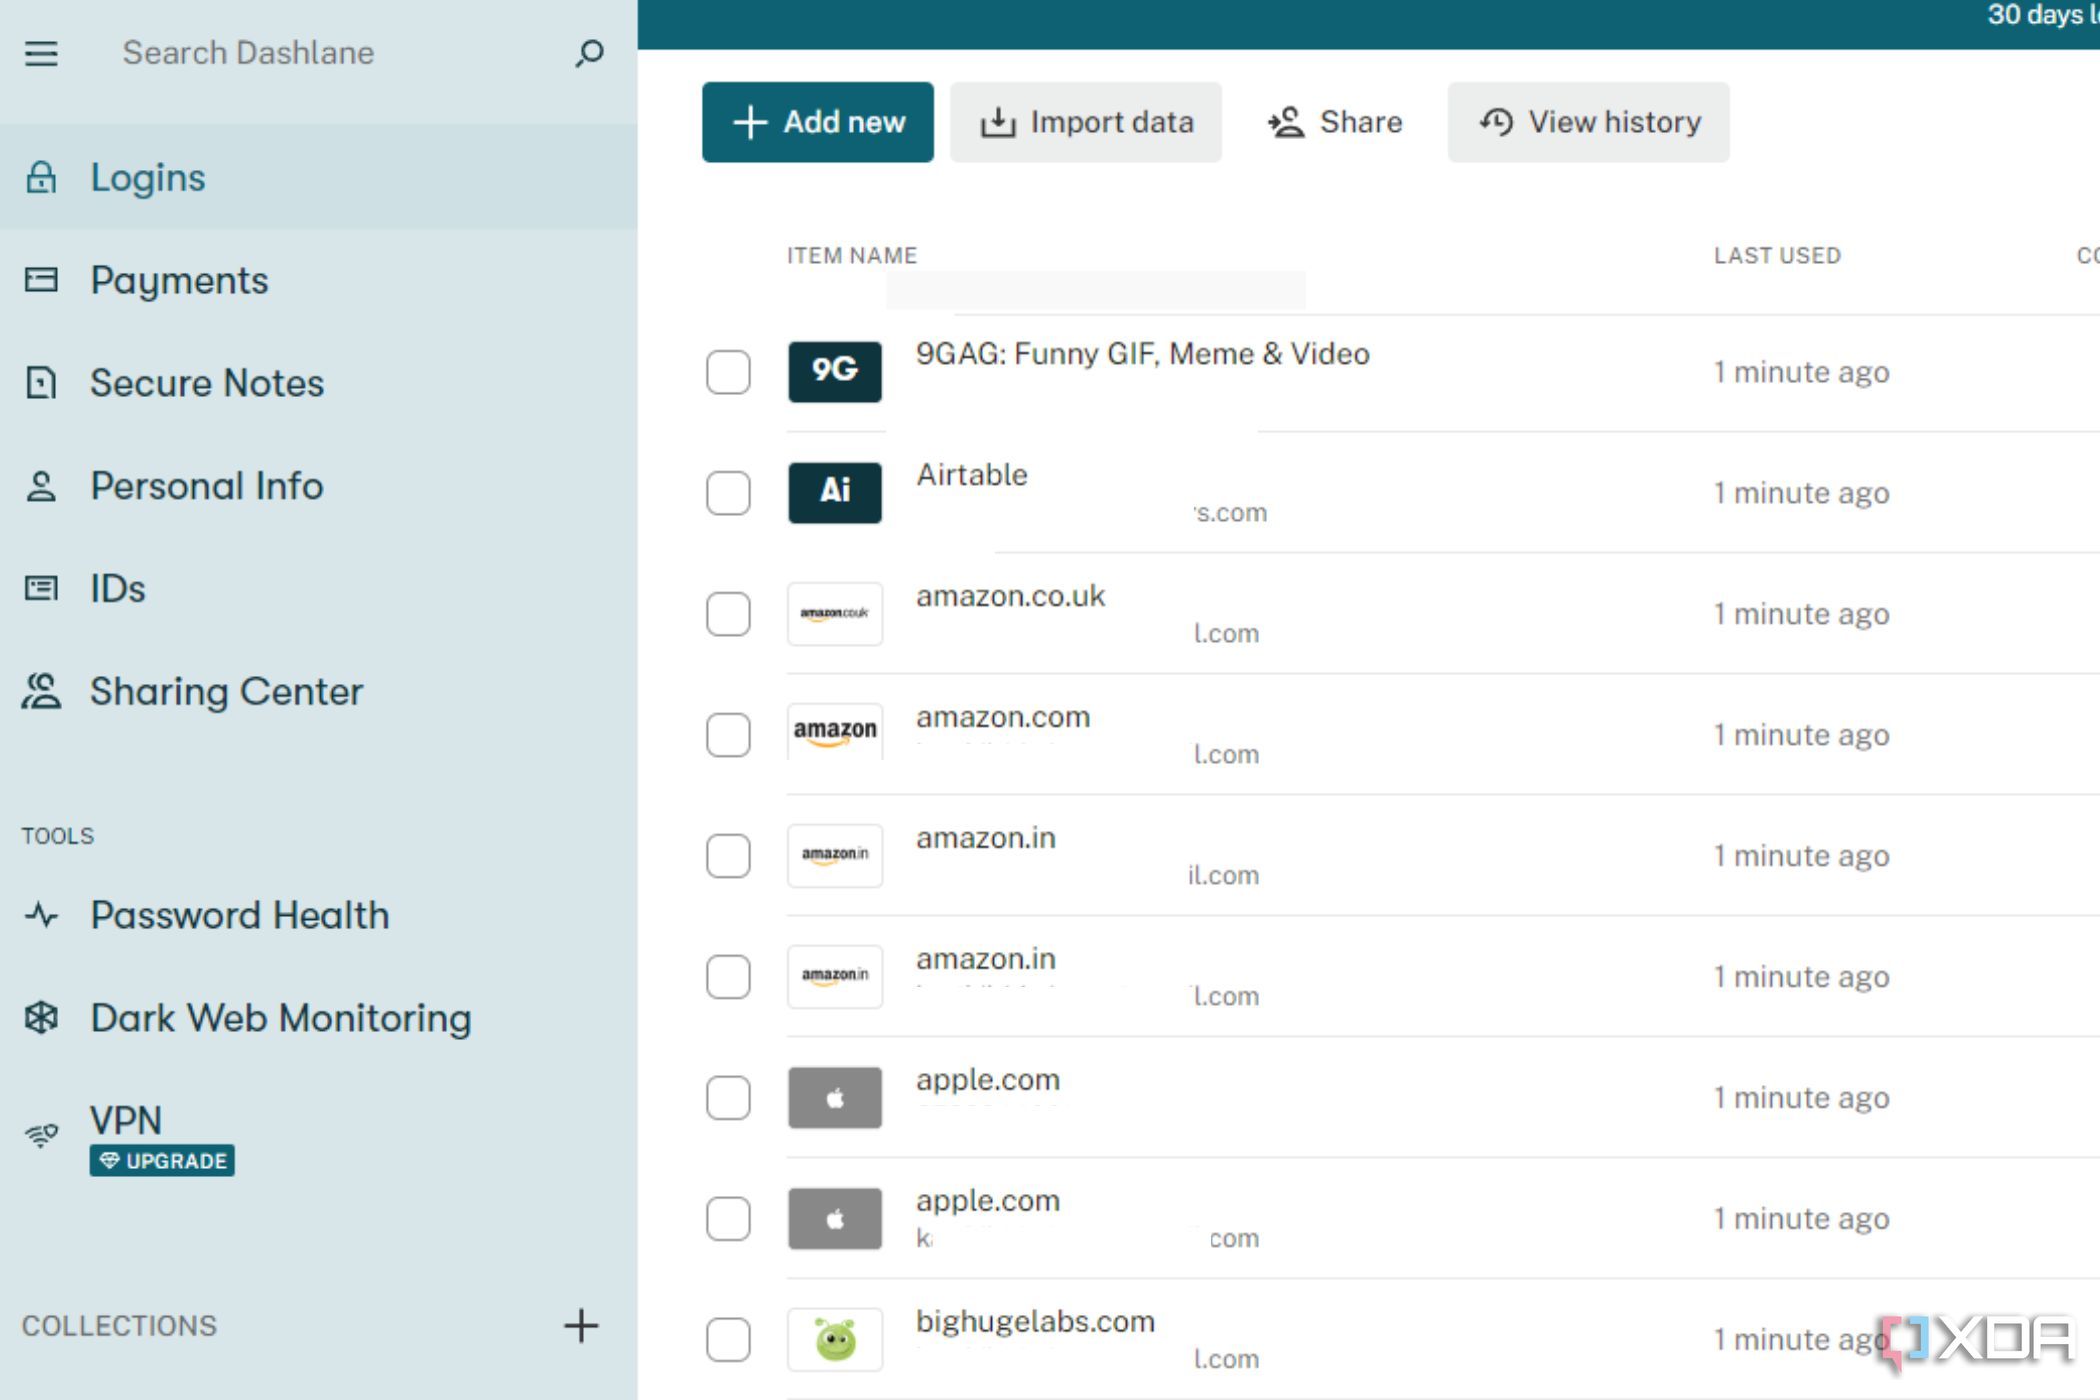 A screenshot showing the Login tab within the web interface of Dashlane password manager.